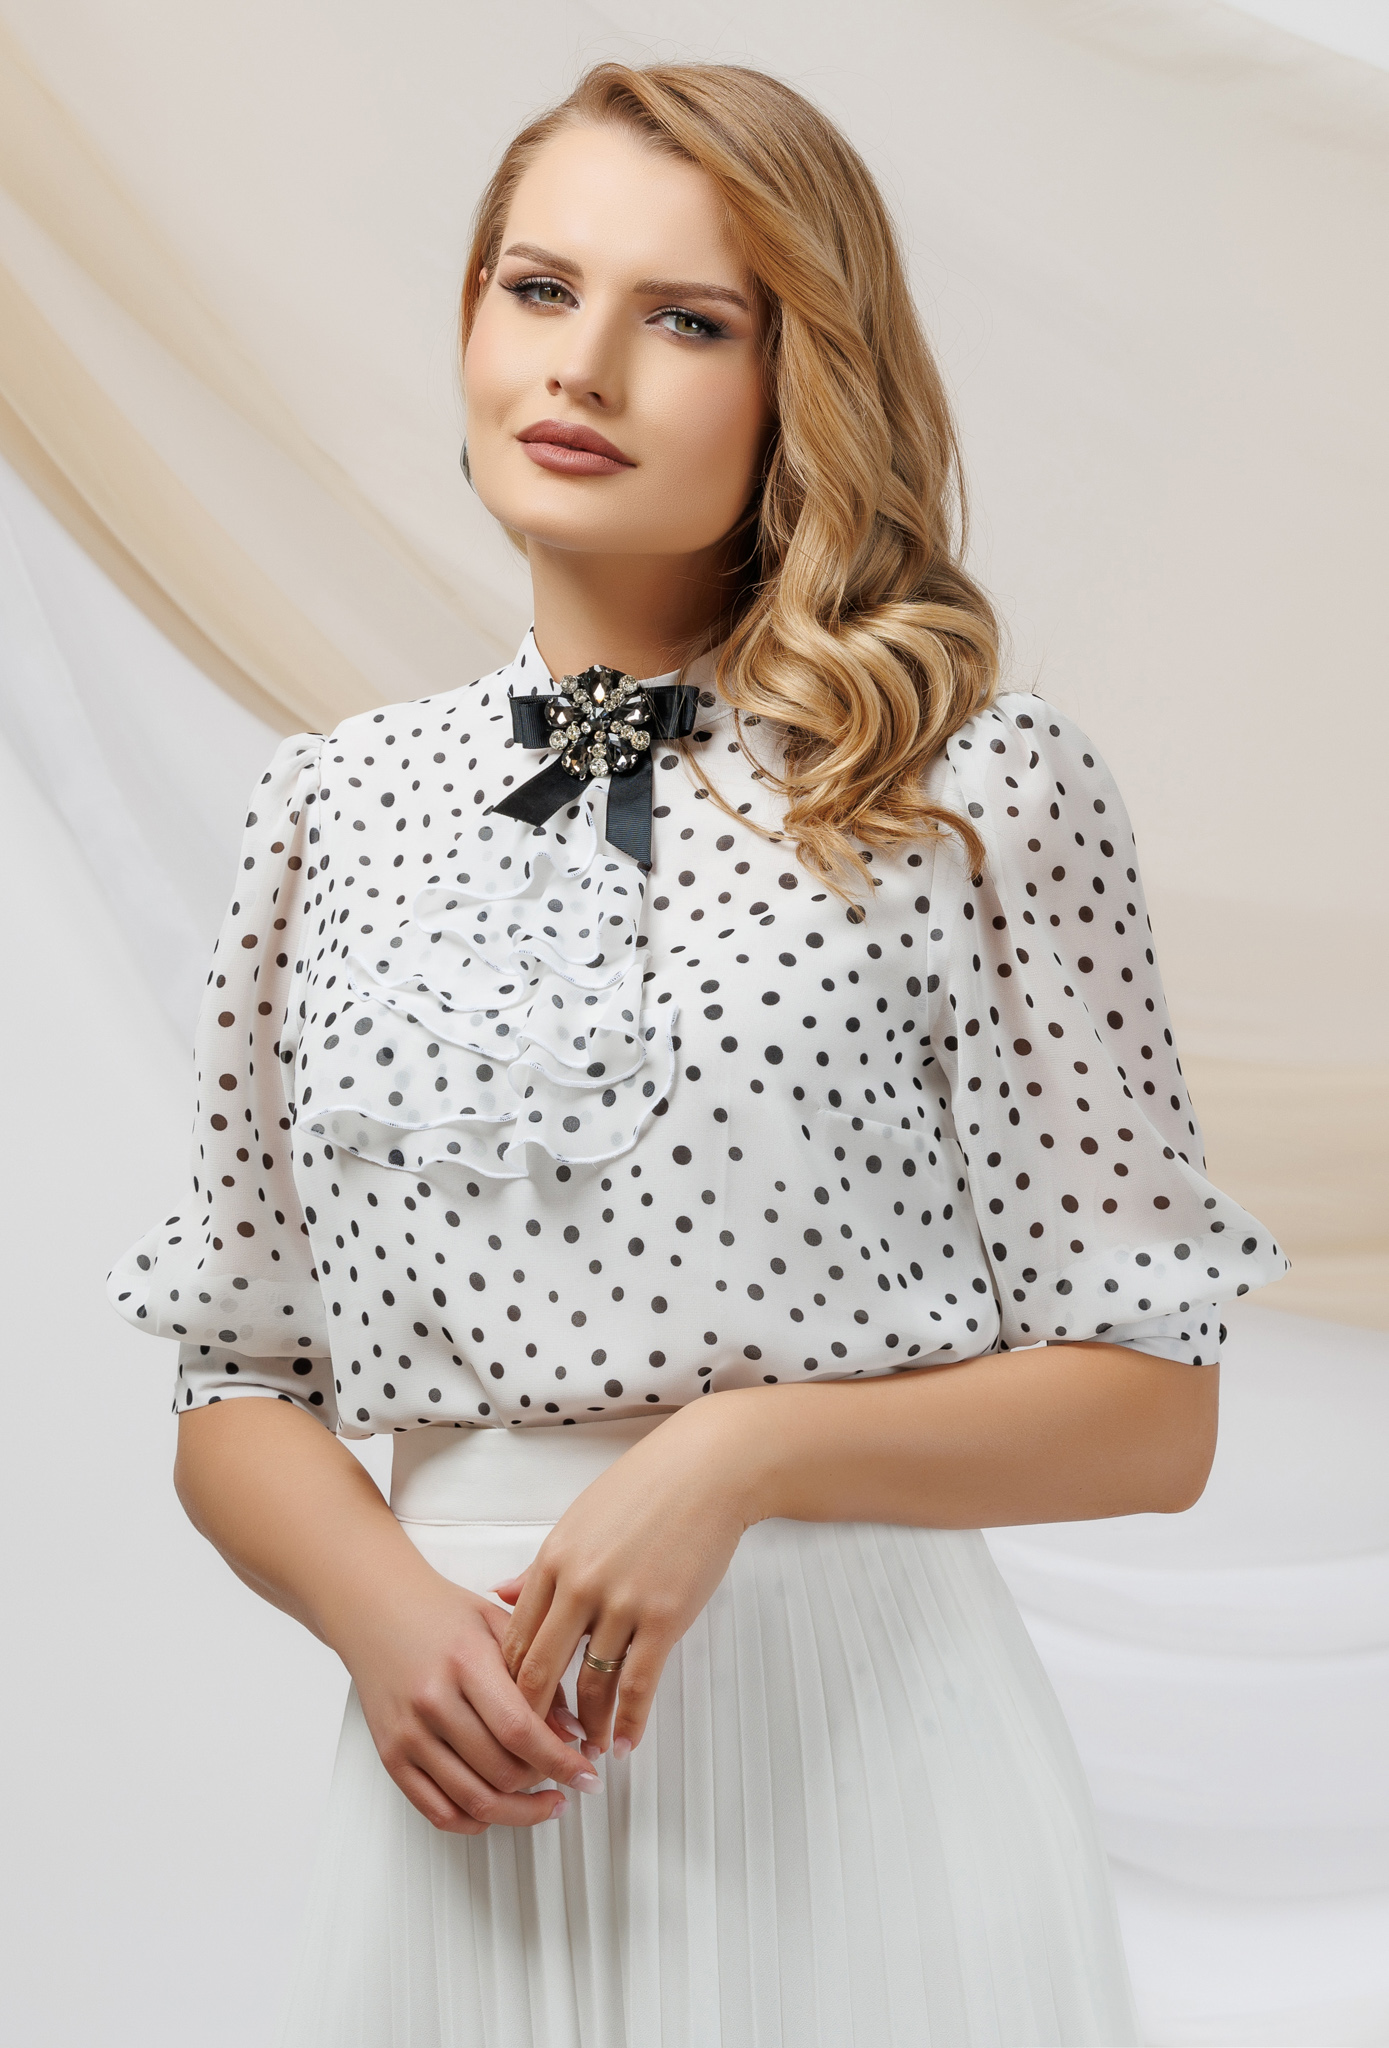 Women`s blouse from veil fabric loose fit accessorized with breastpin